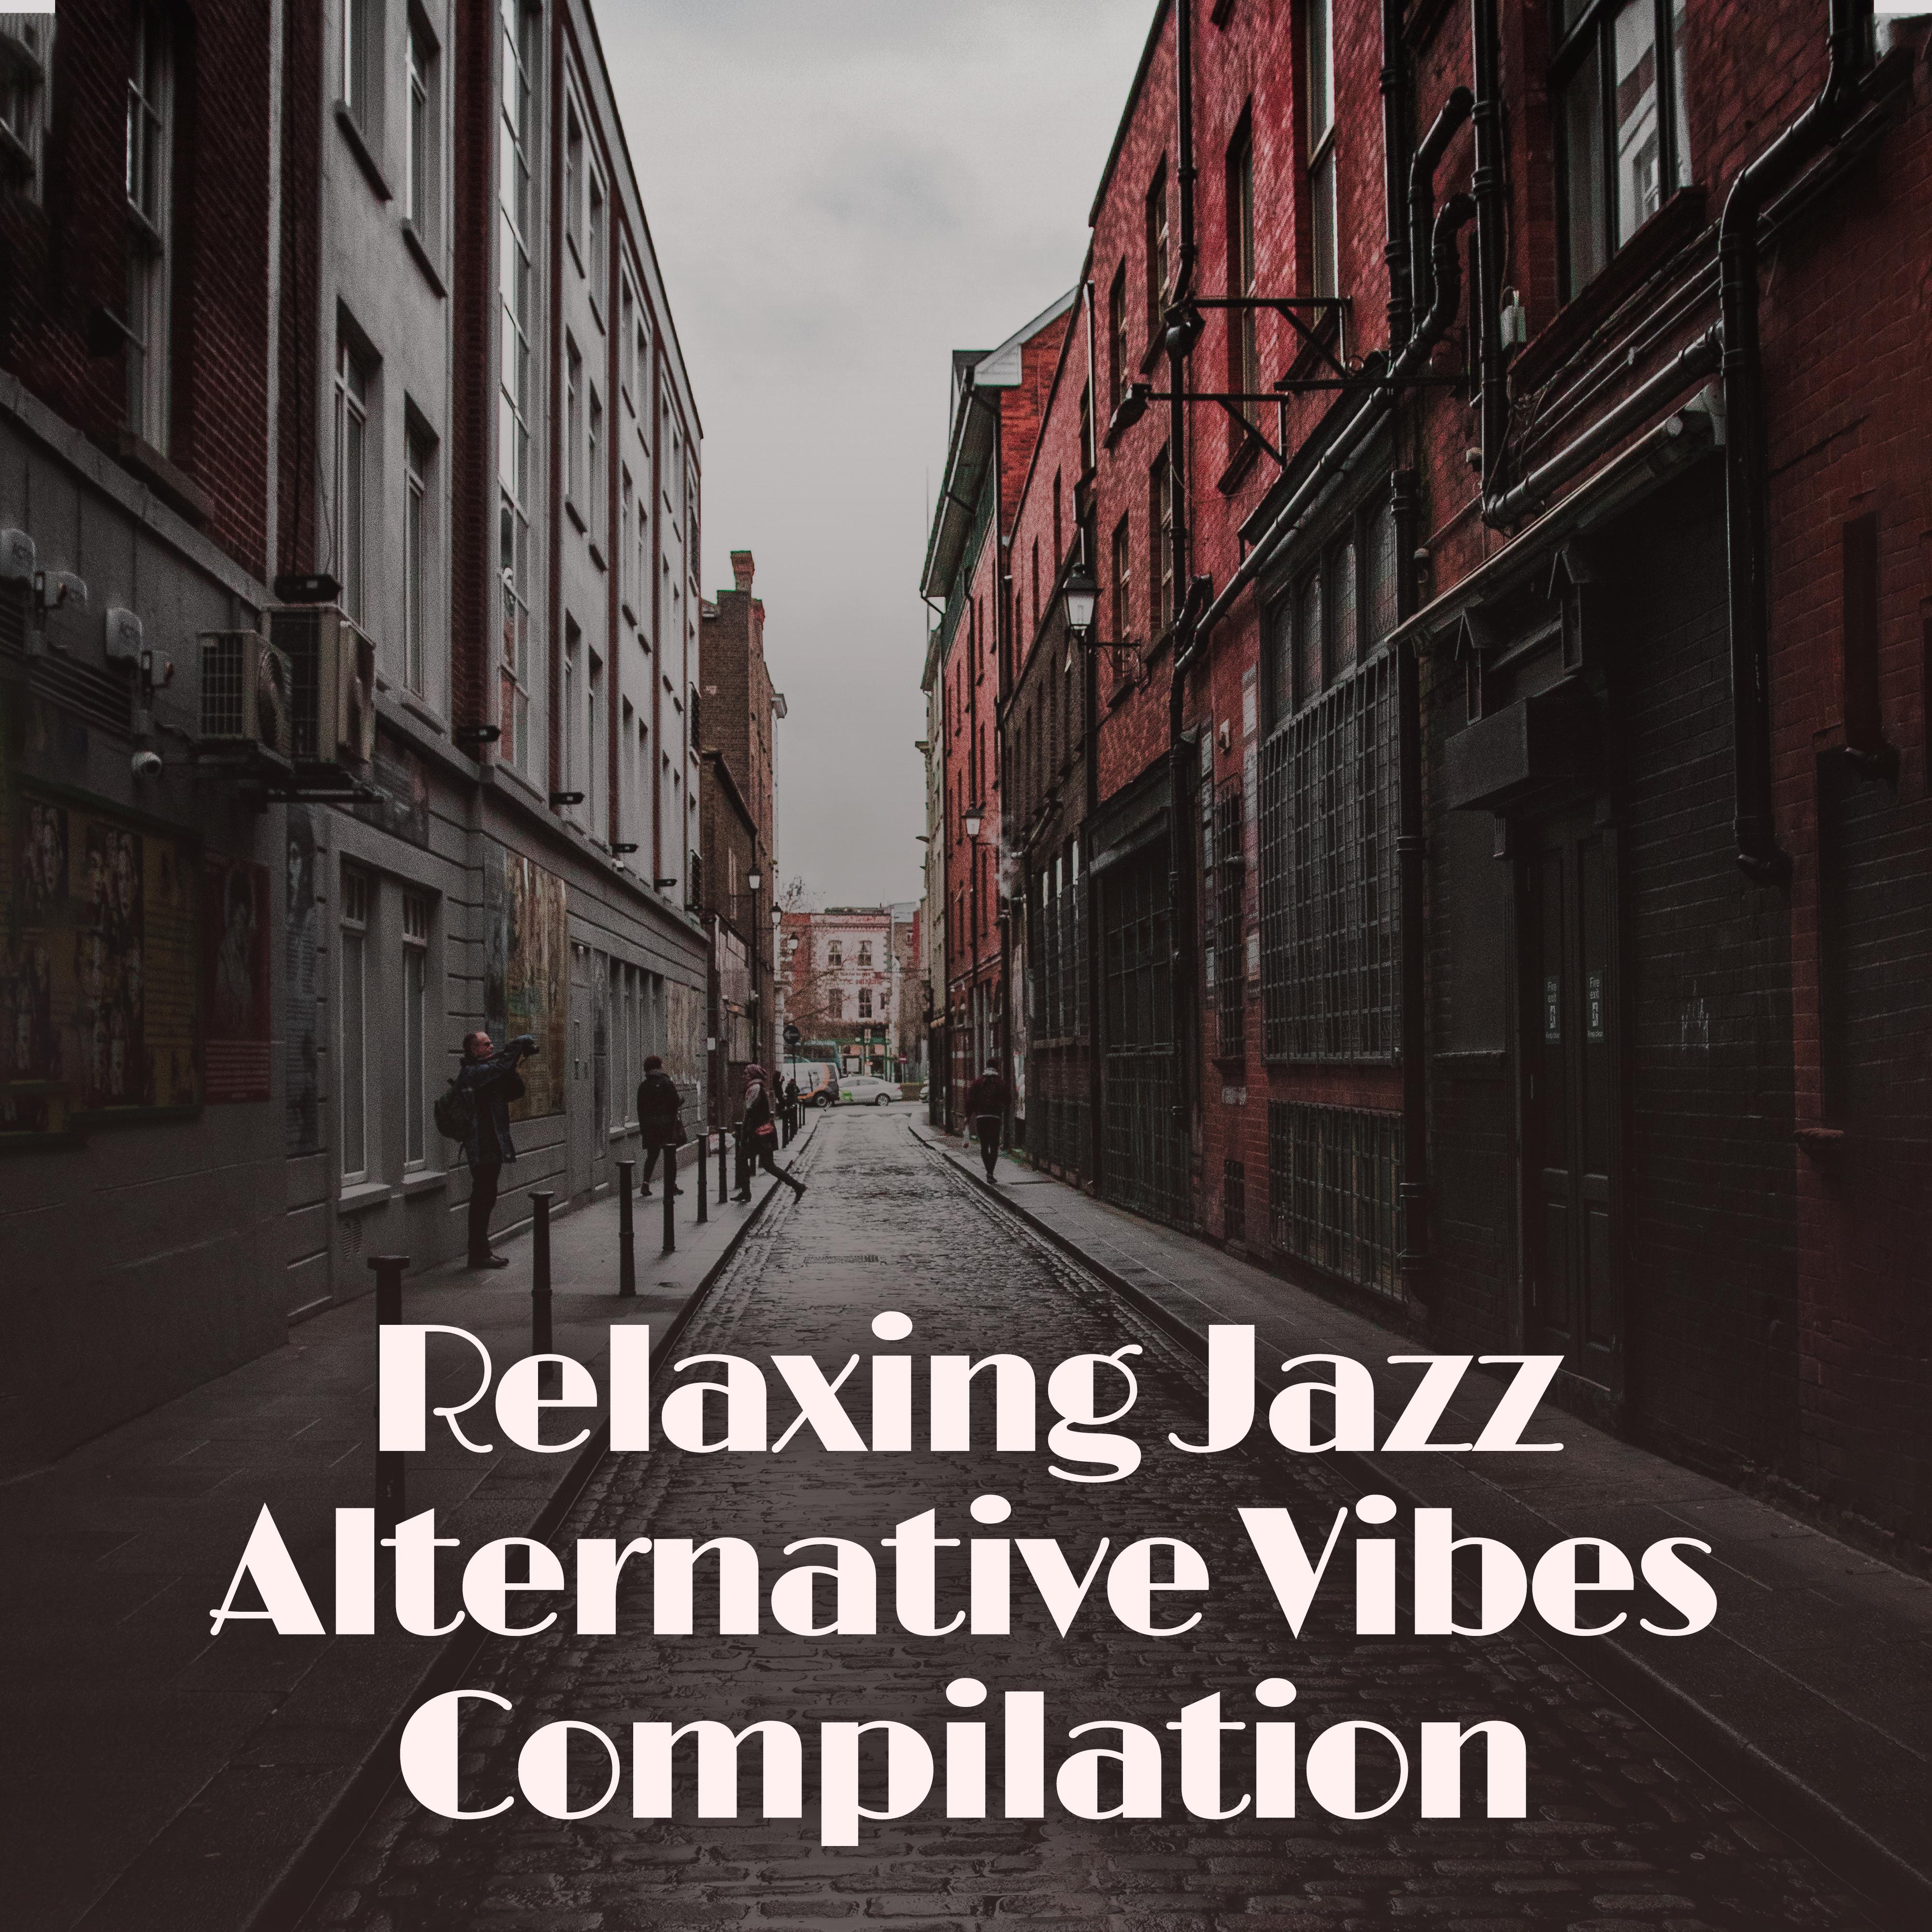 Relaxing Jazz Alternative Vibes Compilation: 15 Instrumental Smooth Jazz Tracks for Total Relaxation at Home with Love, Vintage Melodies & Sounds of Piano, Sax & More